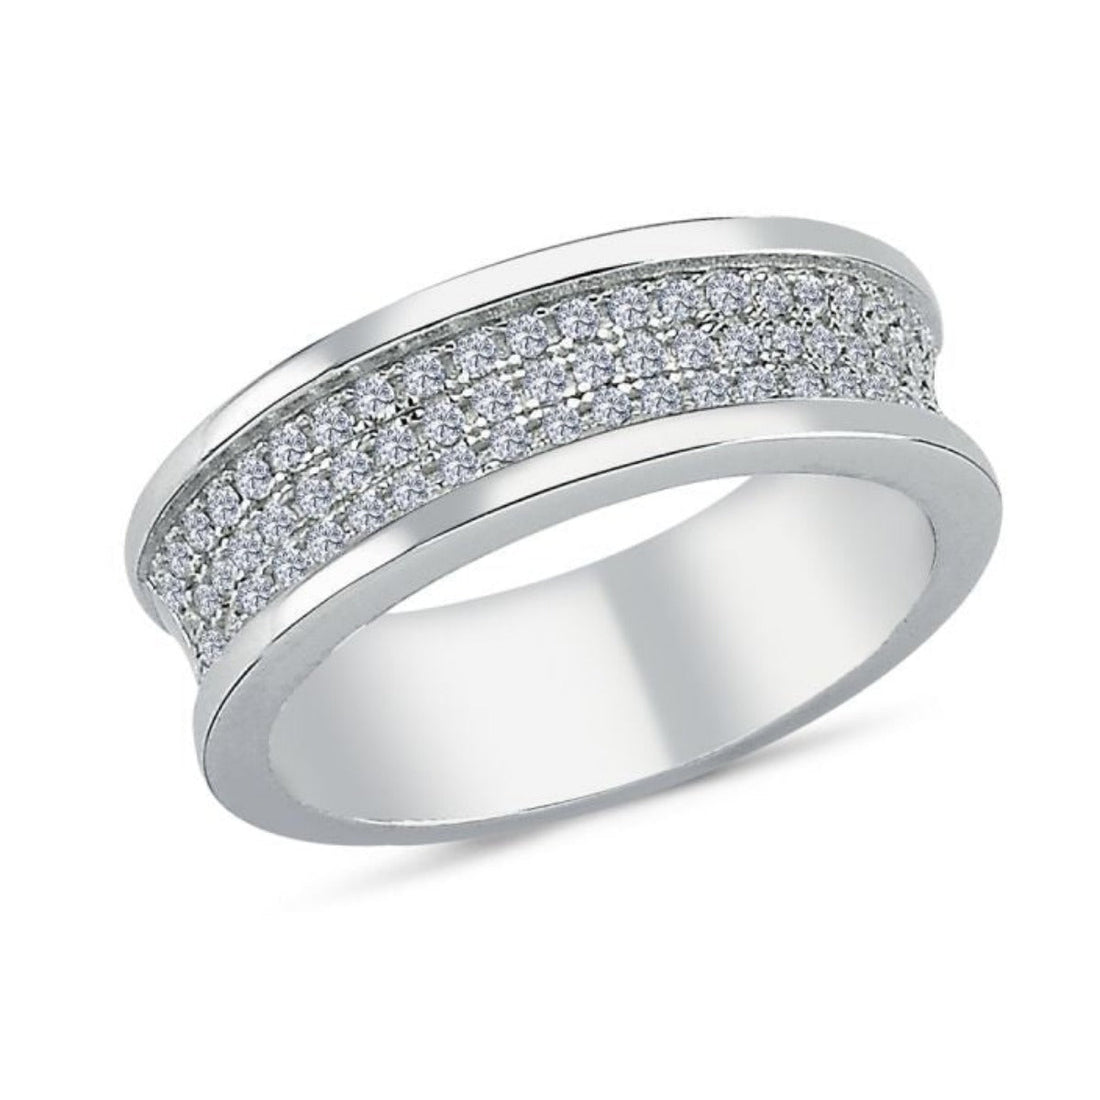 Pave Set Cubic Zirconia Half Eternity Ring in Rhodium Plated Silver